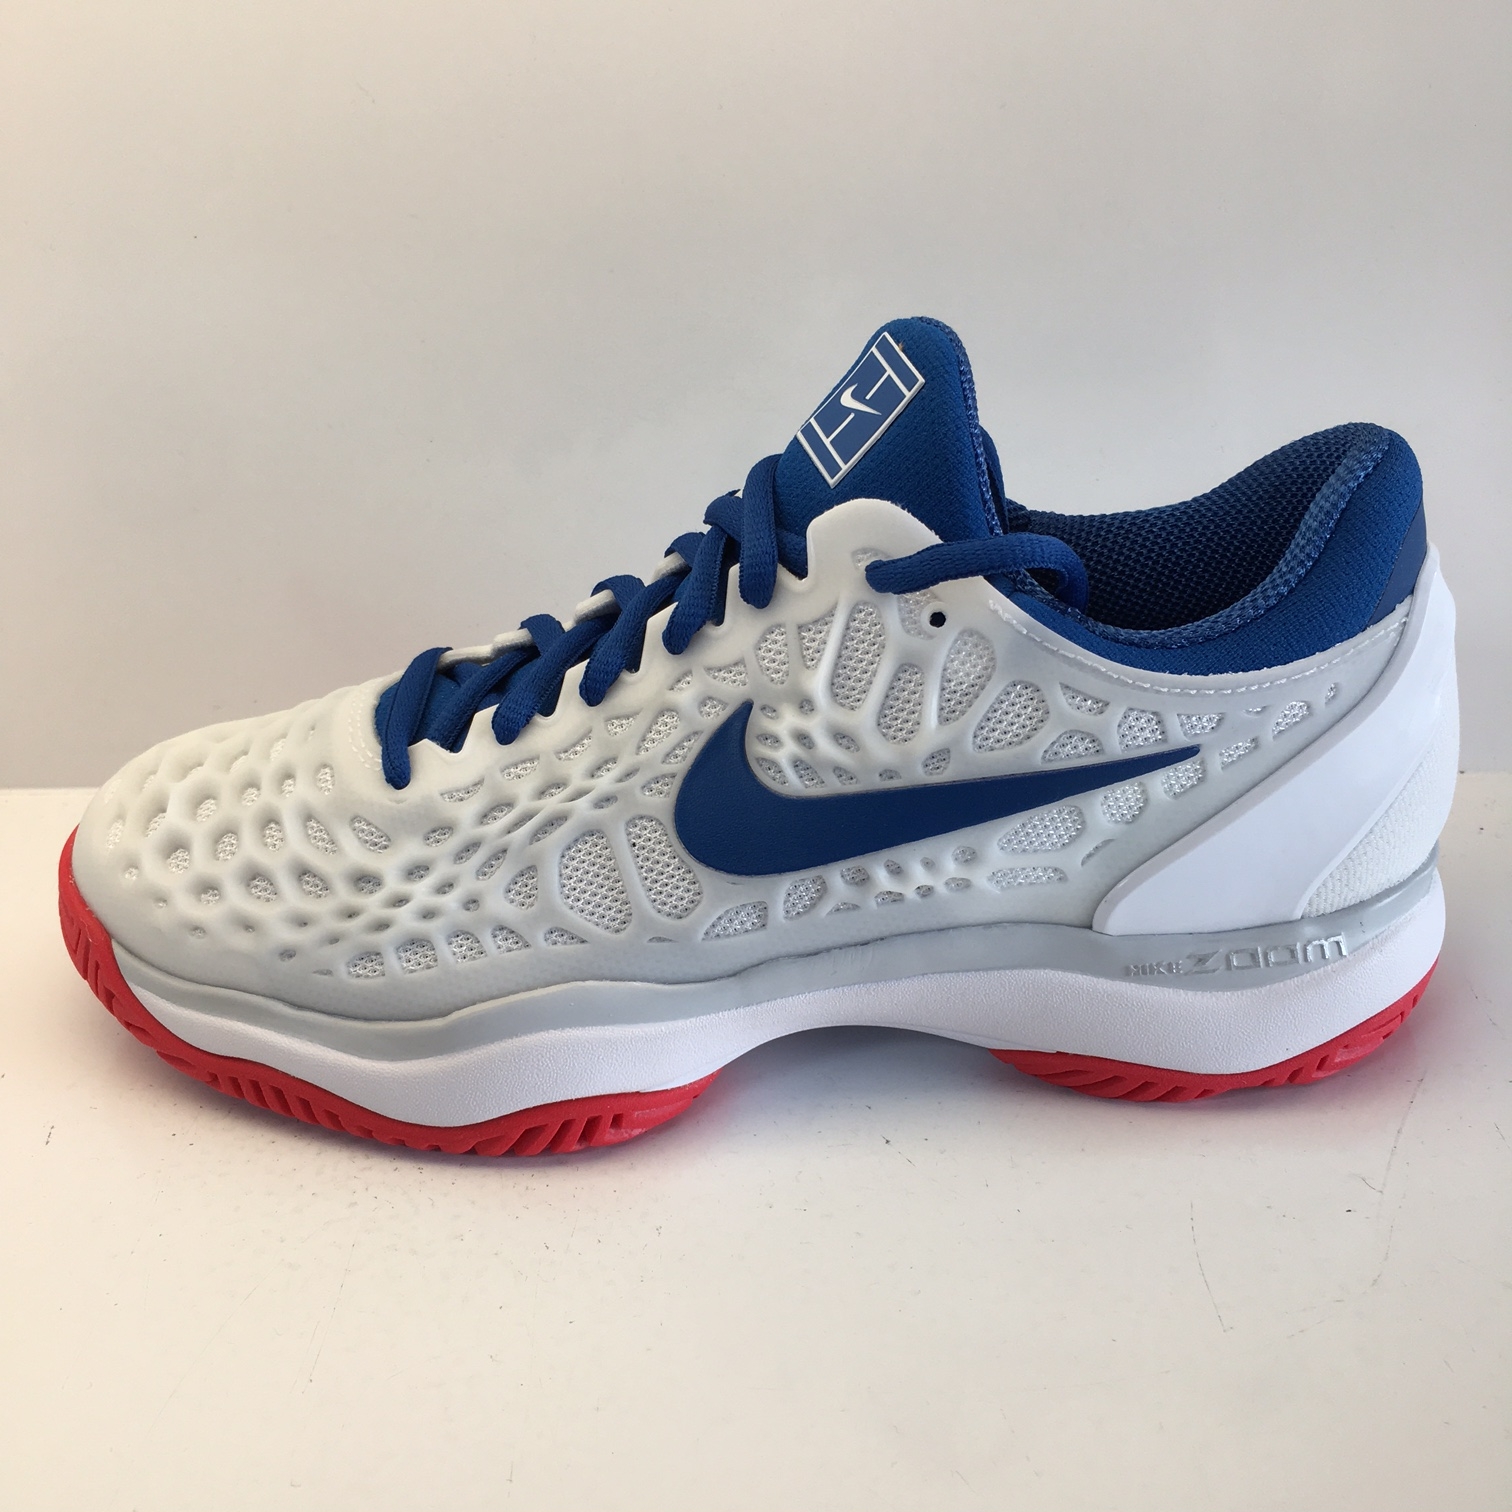 Product Spotlight: Nike Zoom Cage 3 – First Serve Tennis